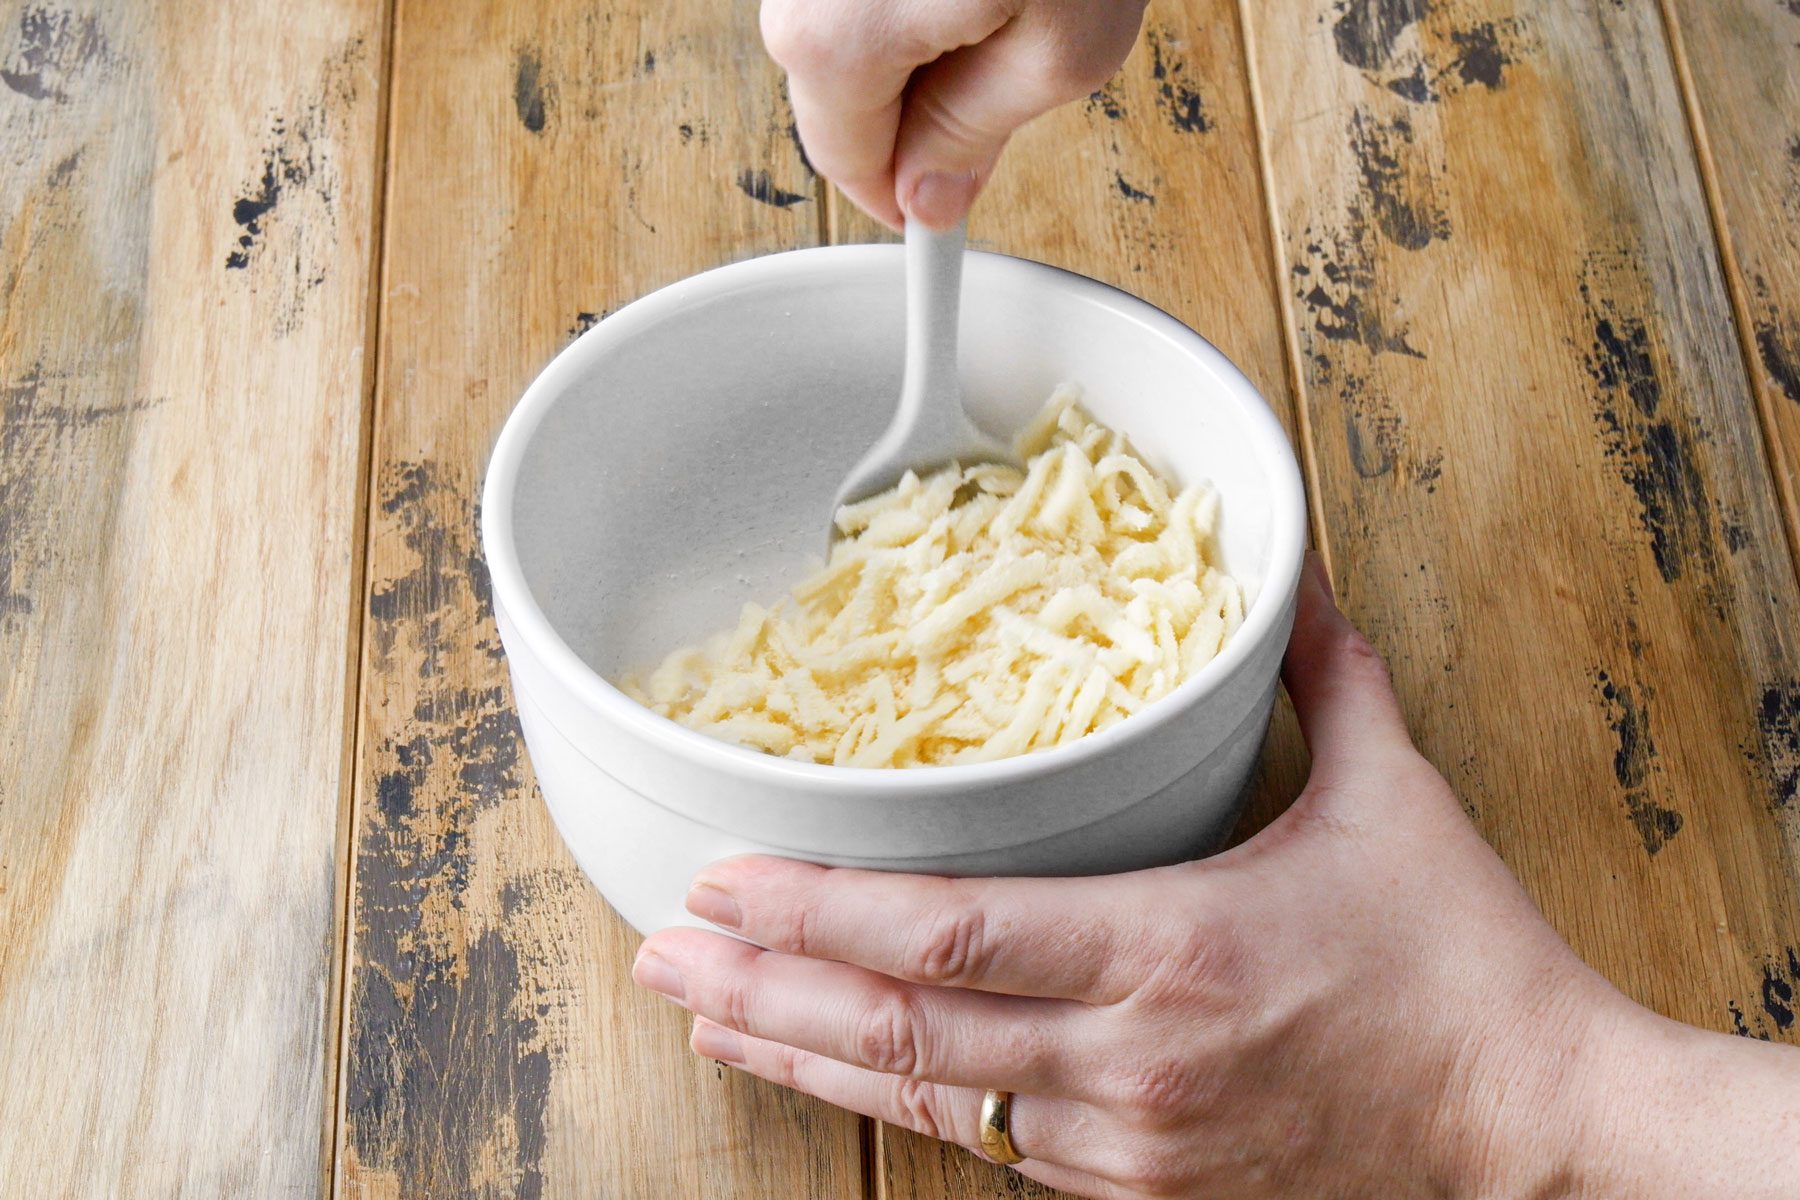 Combining the mozzarella and Parmesan in a small bowl with a spoon